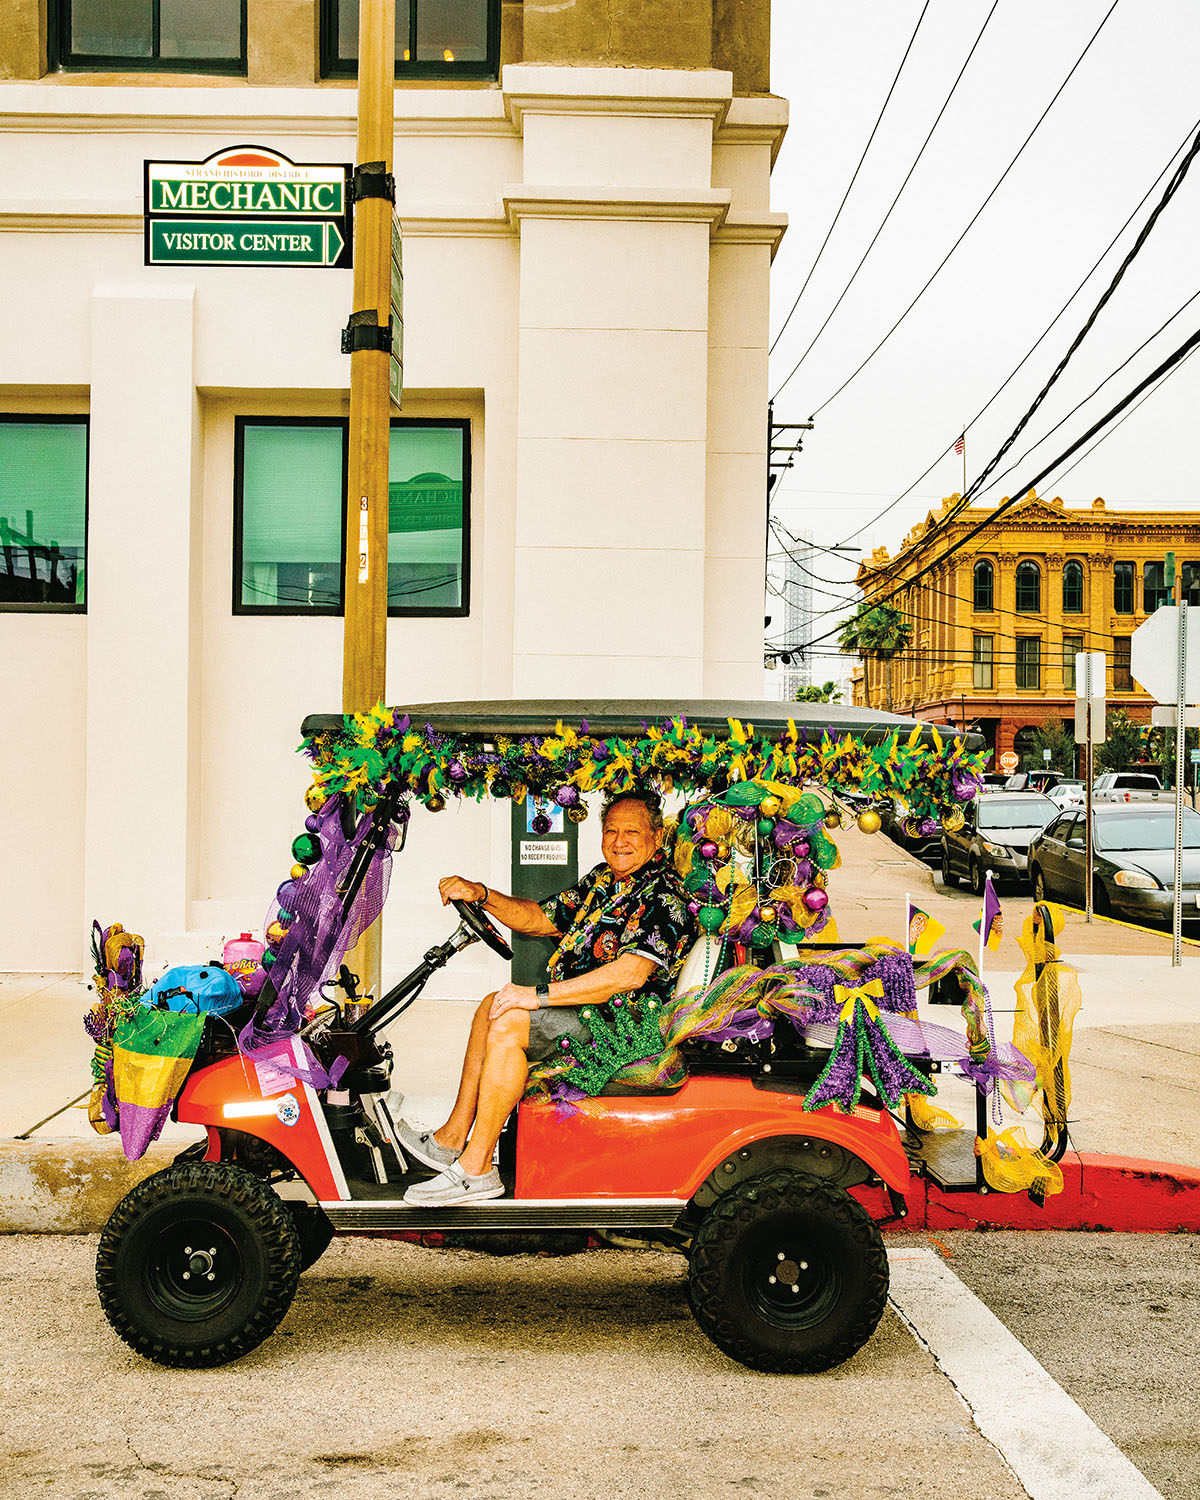 A man drives a golf cart decorated with green, purple, and gold decorations on a city street